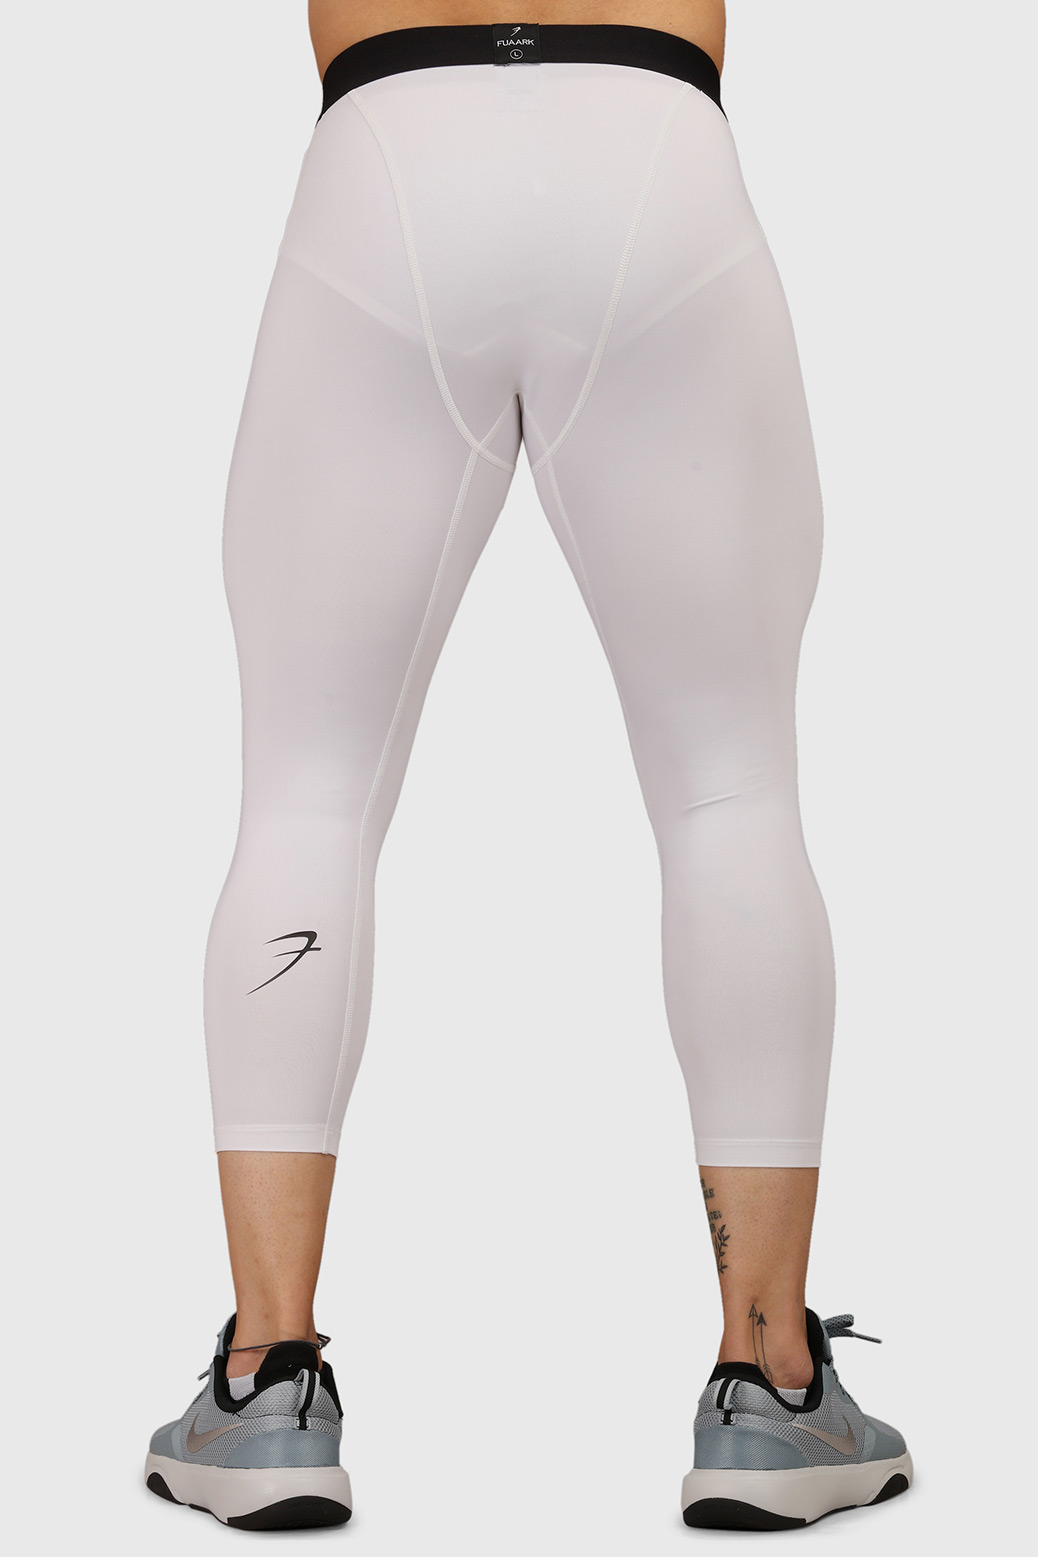 Fuaark Gym Compression White Tights